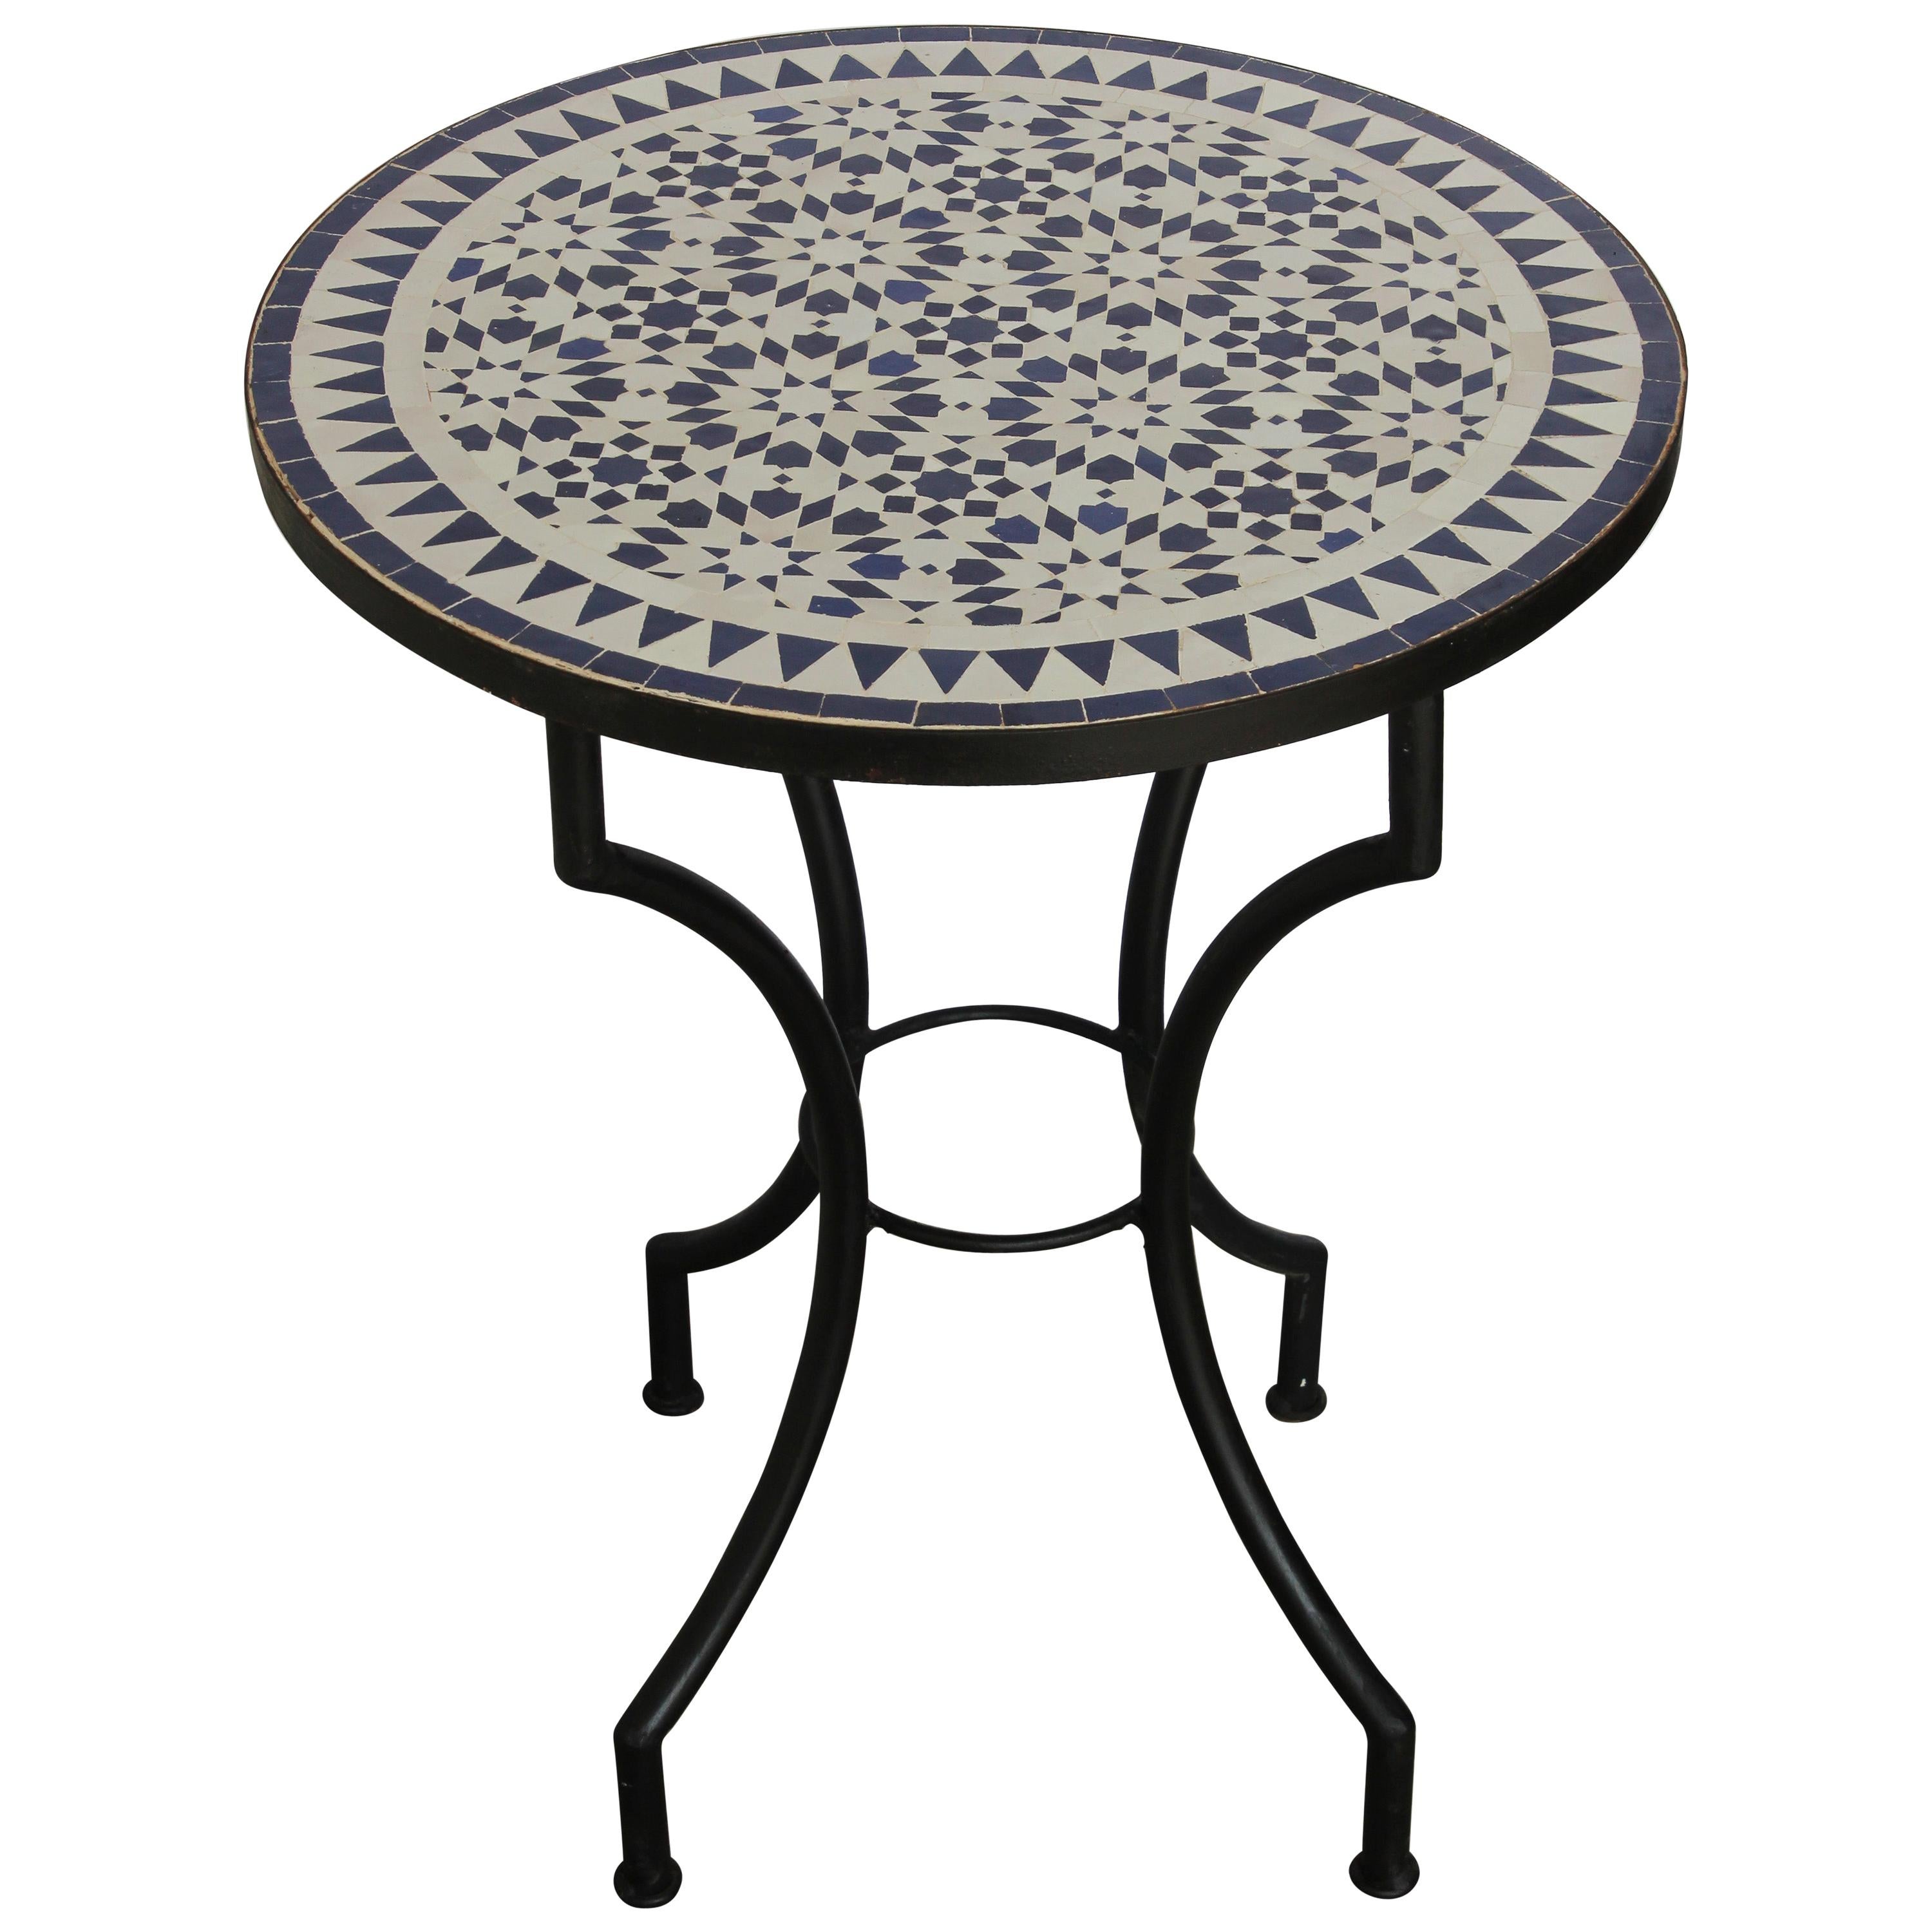 Moroccan Fez Mosaic Blue and White Tiles Bistro Table